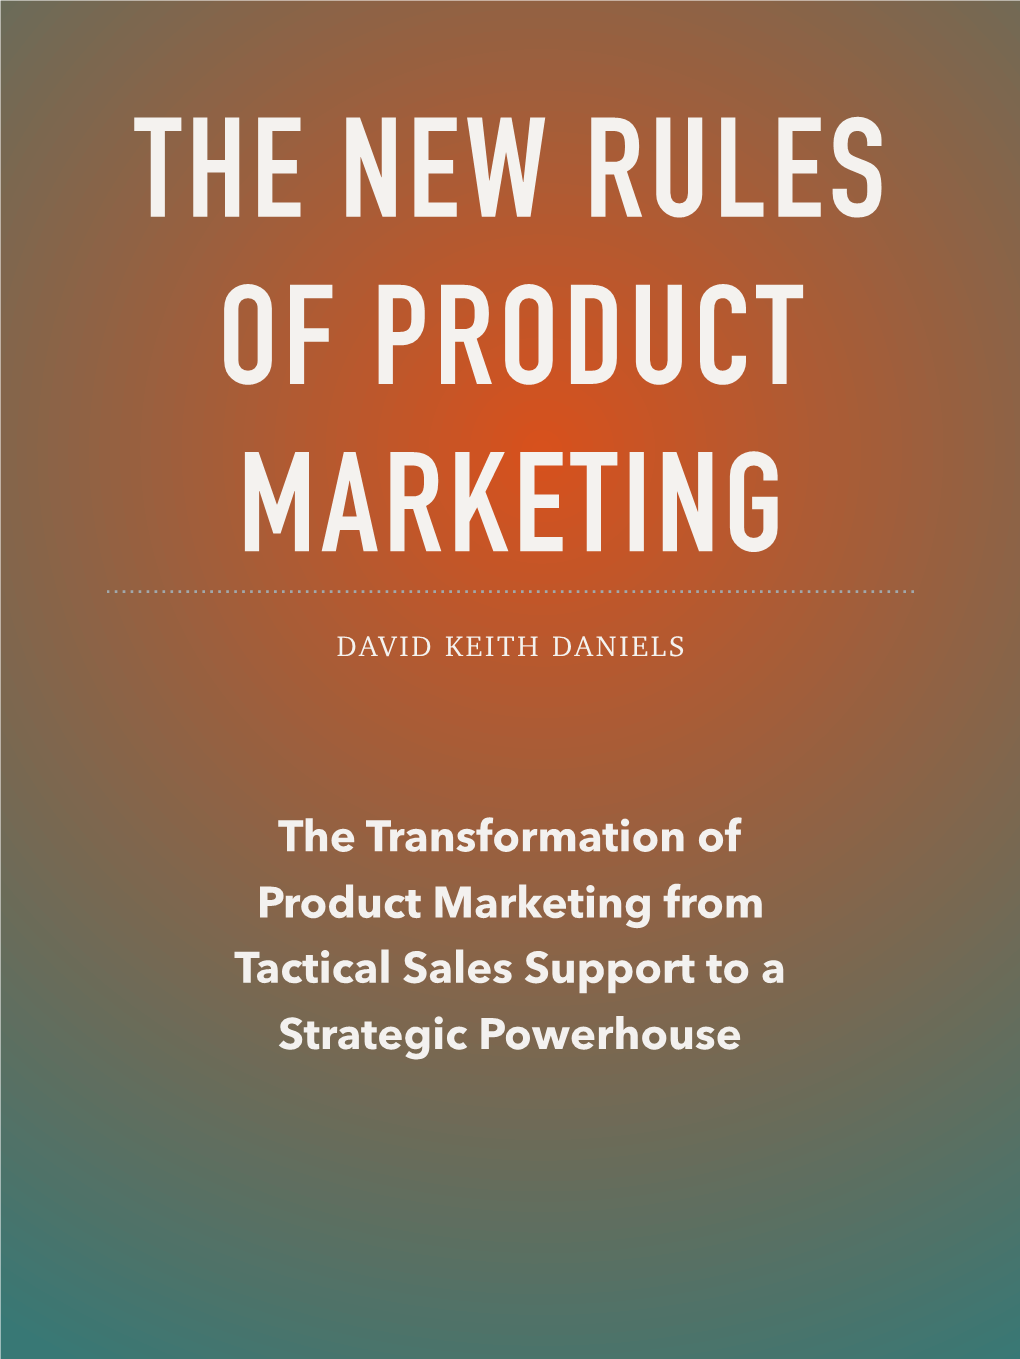 The New Rules of Product Marketing Ebook V2